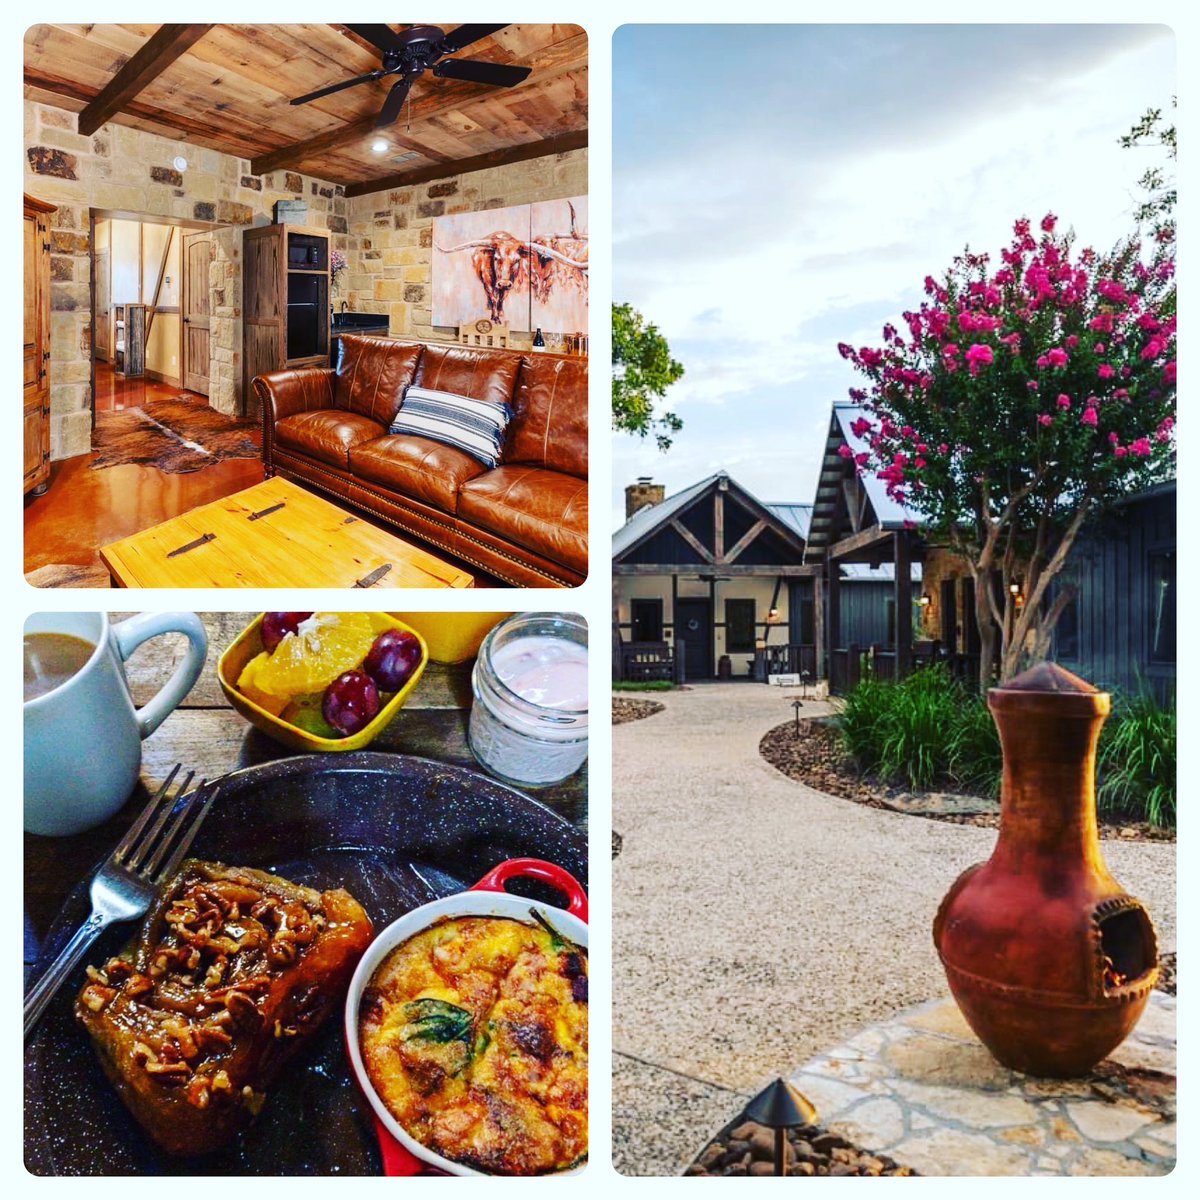 ⭐⭐⭐⭐⭐
Diamond in the Hill Country! Browse our beautiful cabins & cottages & book your stay! Book a 2-night stay (Mon - Thurs) through September 21 & get 15% off your lodging & a $50 dining credit to Cabernet Grill! Use code SUMMERDEAL 
cottonginvillage.com/lodging